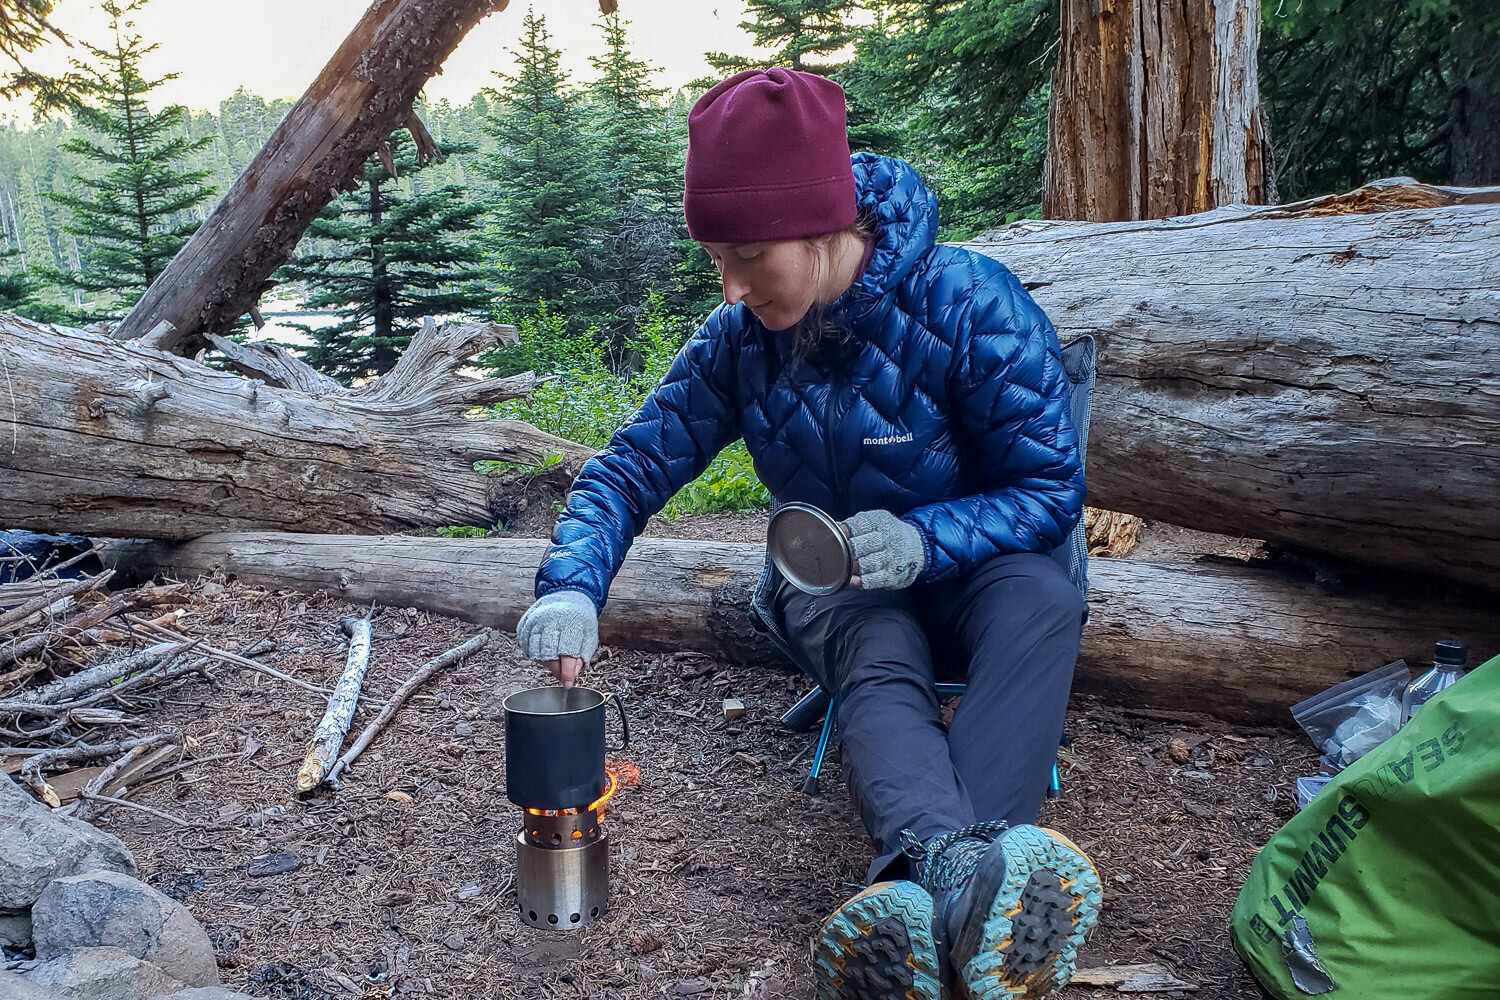 The Solo Stove Lite is an excellent option for cooking on your backcountry adventures.